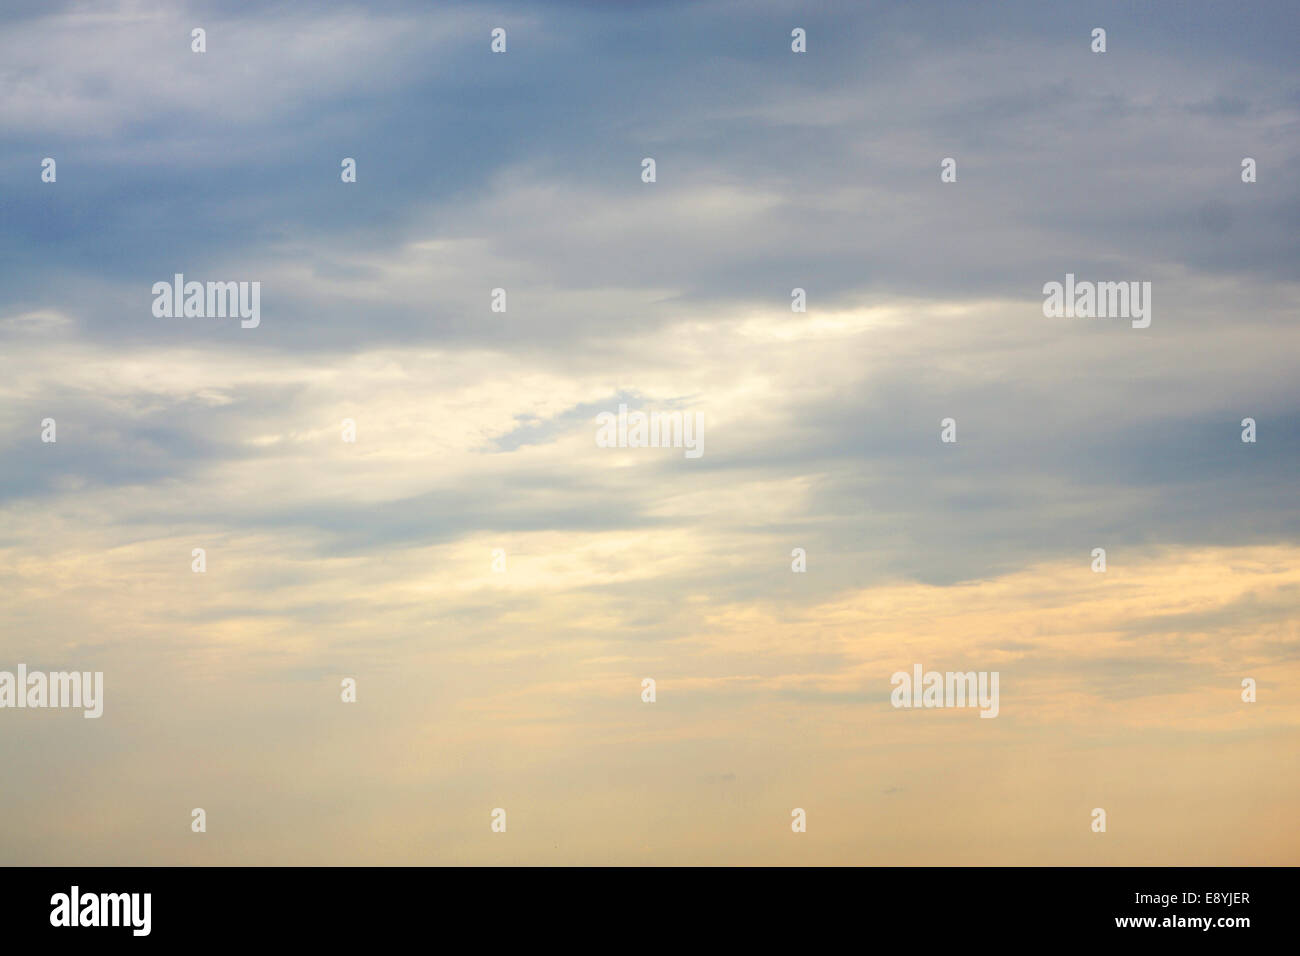 Sky with clouds, for backgrounds or textures Stock Photo